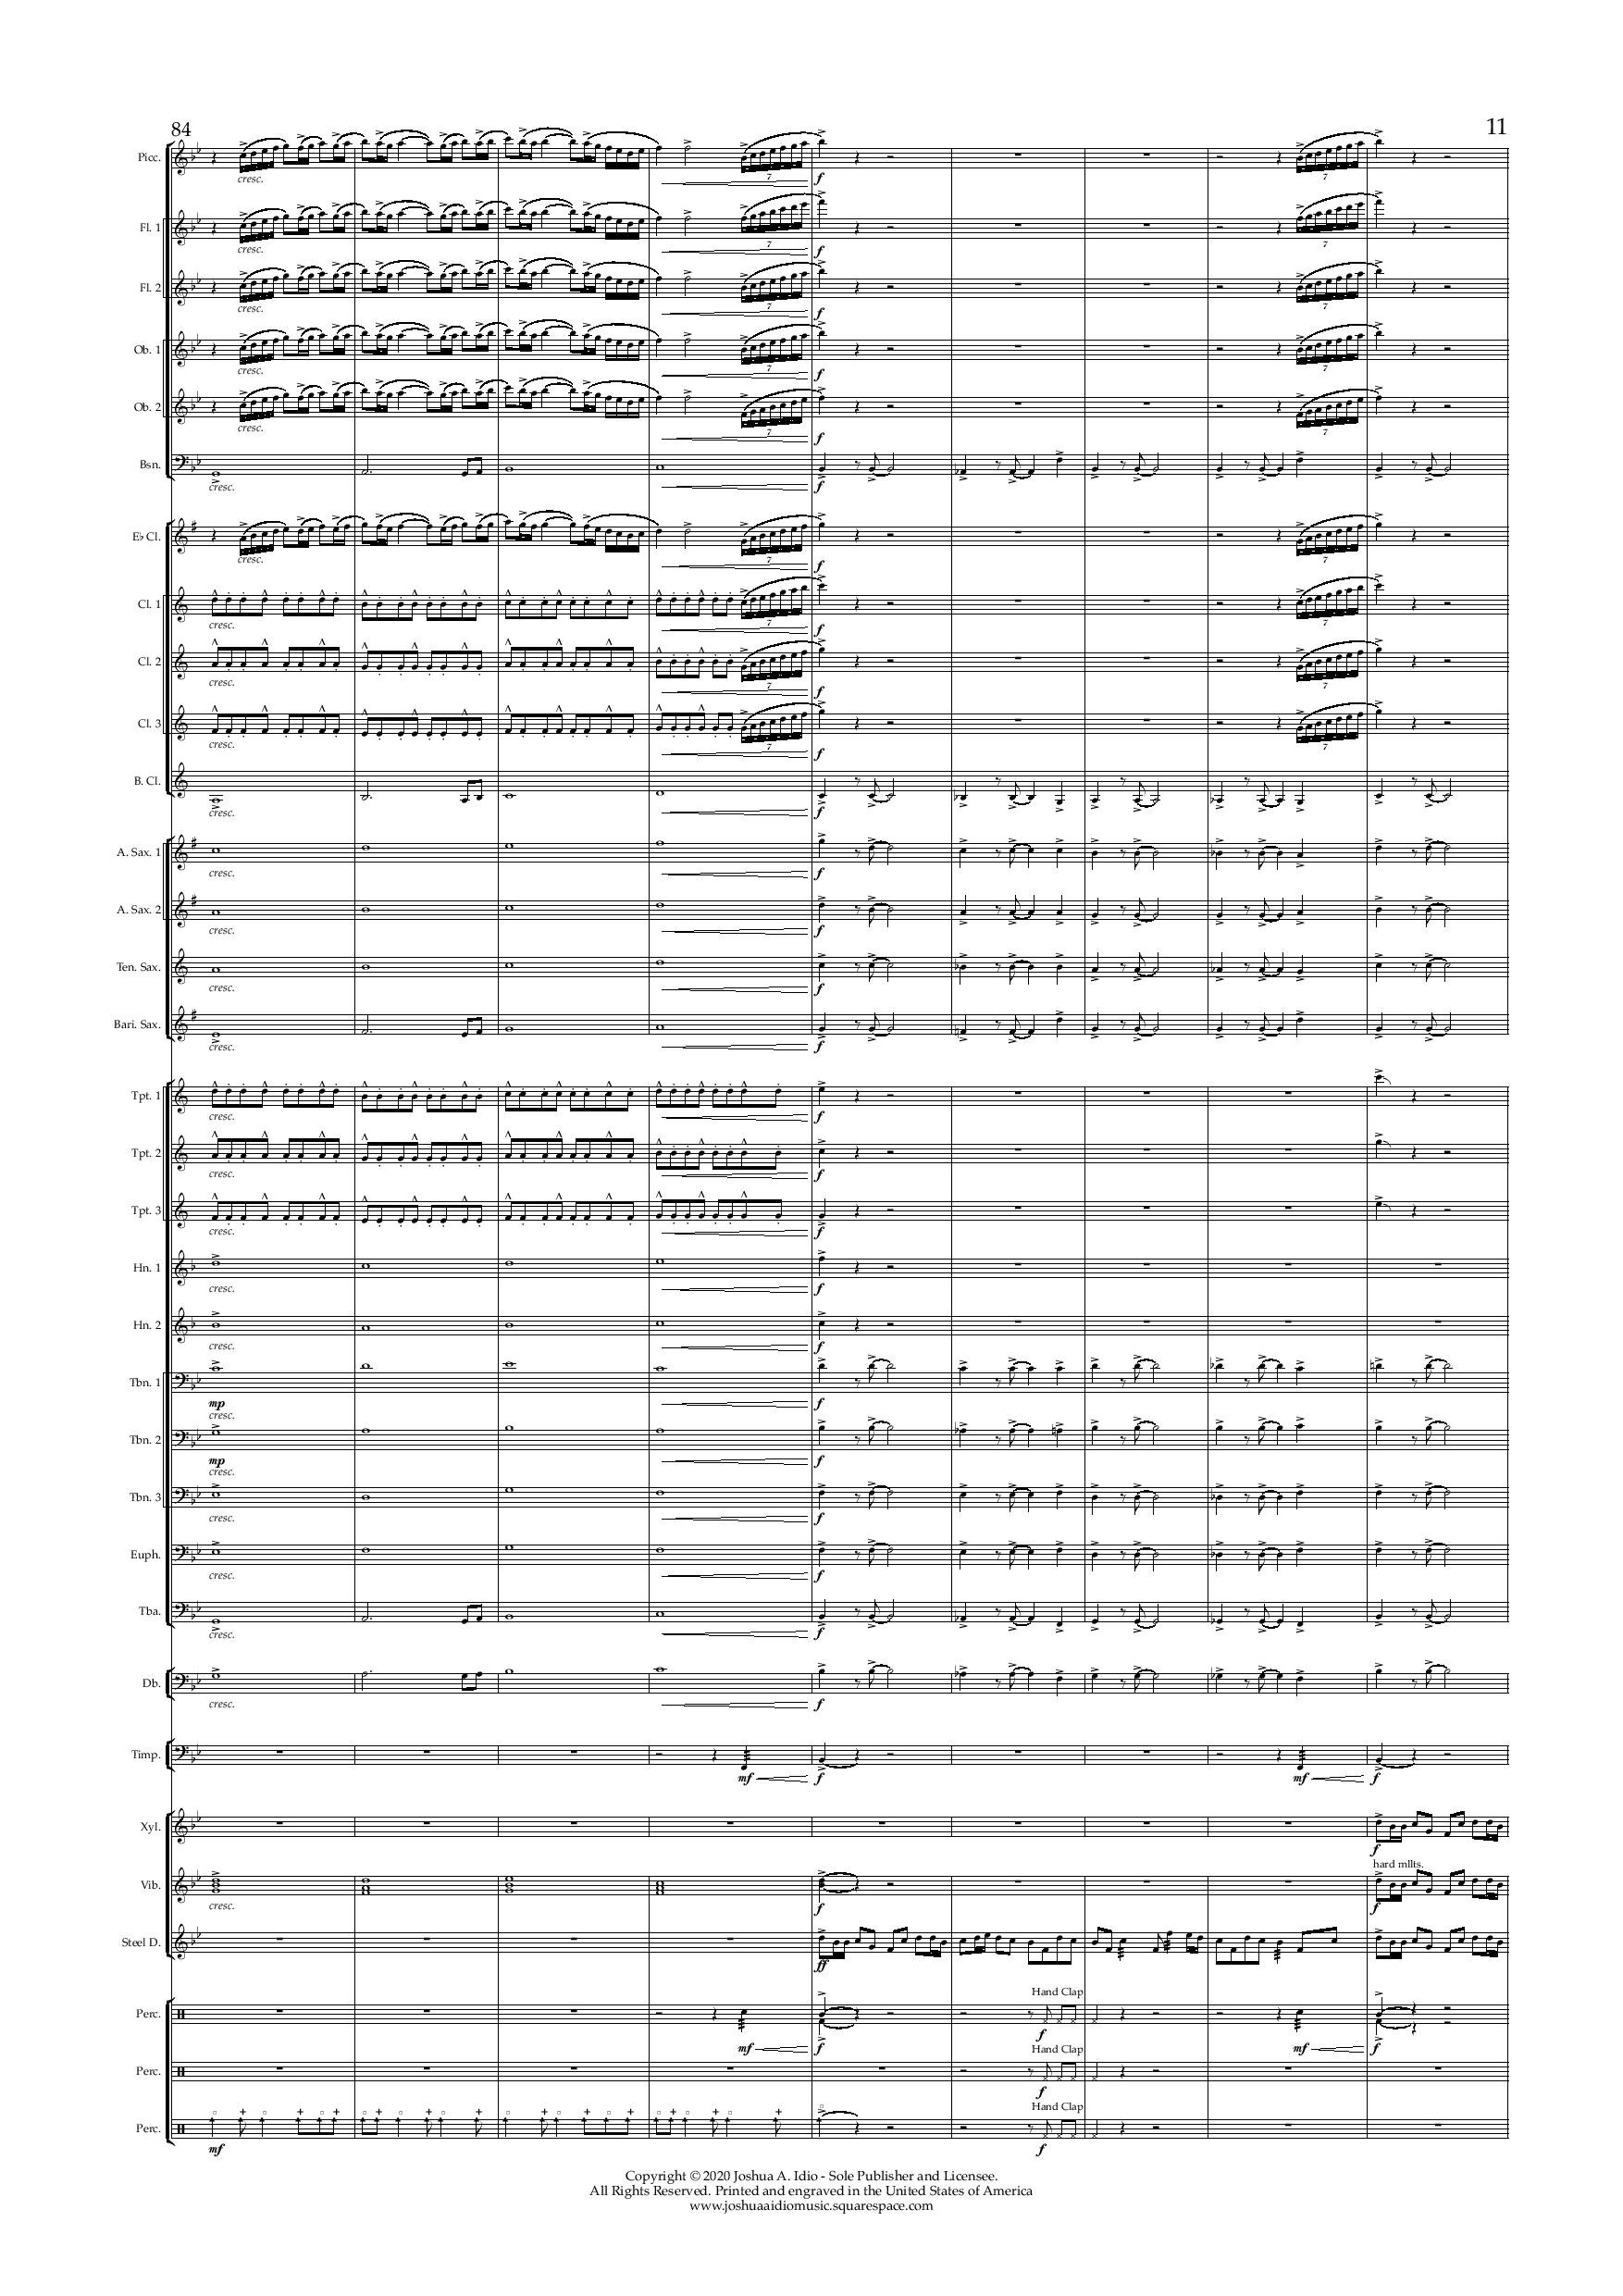 The Cruise Line Dream - Conductor s Score-page-011.jpg